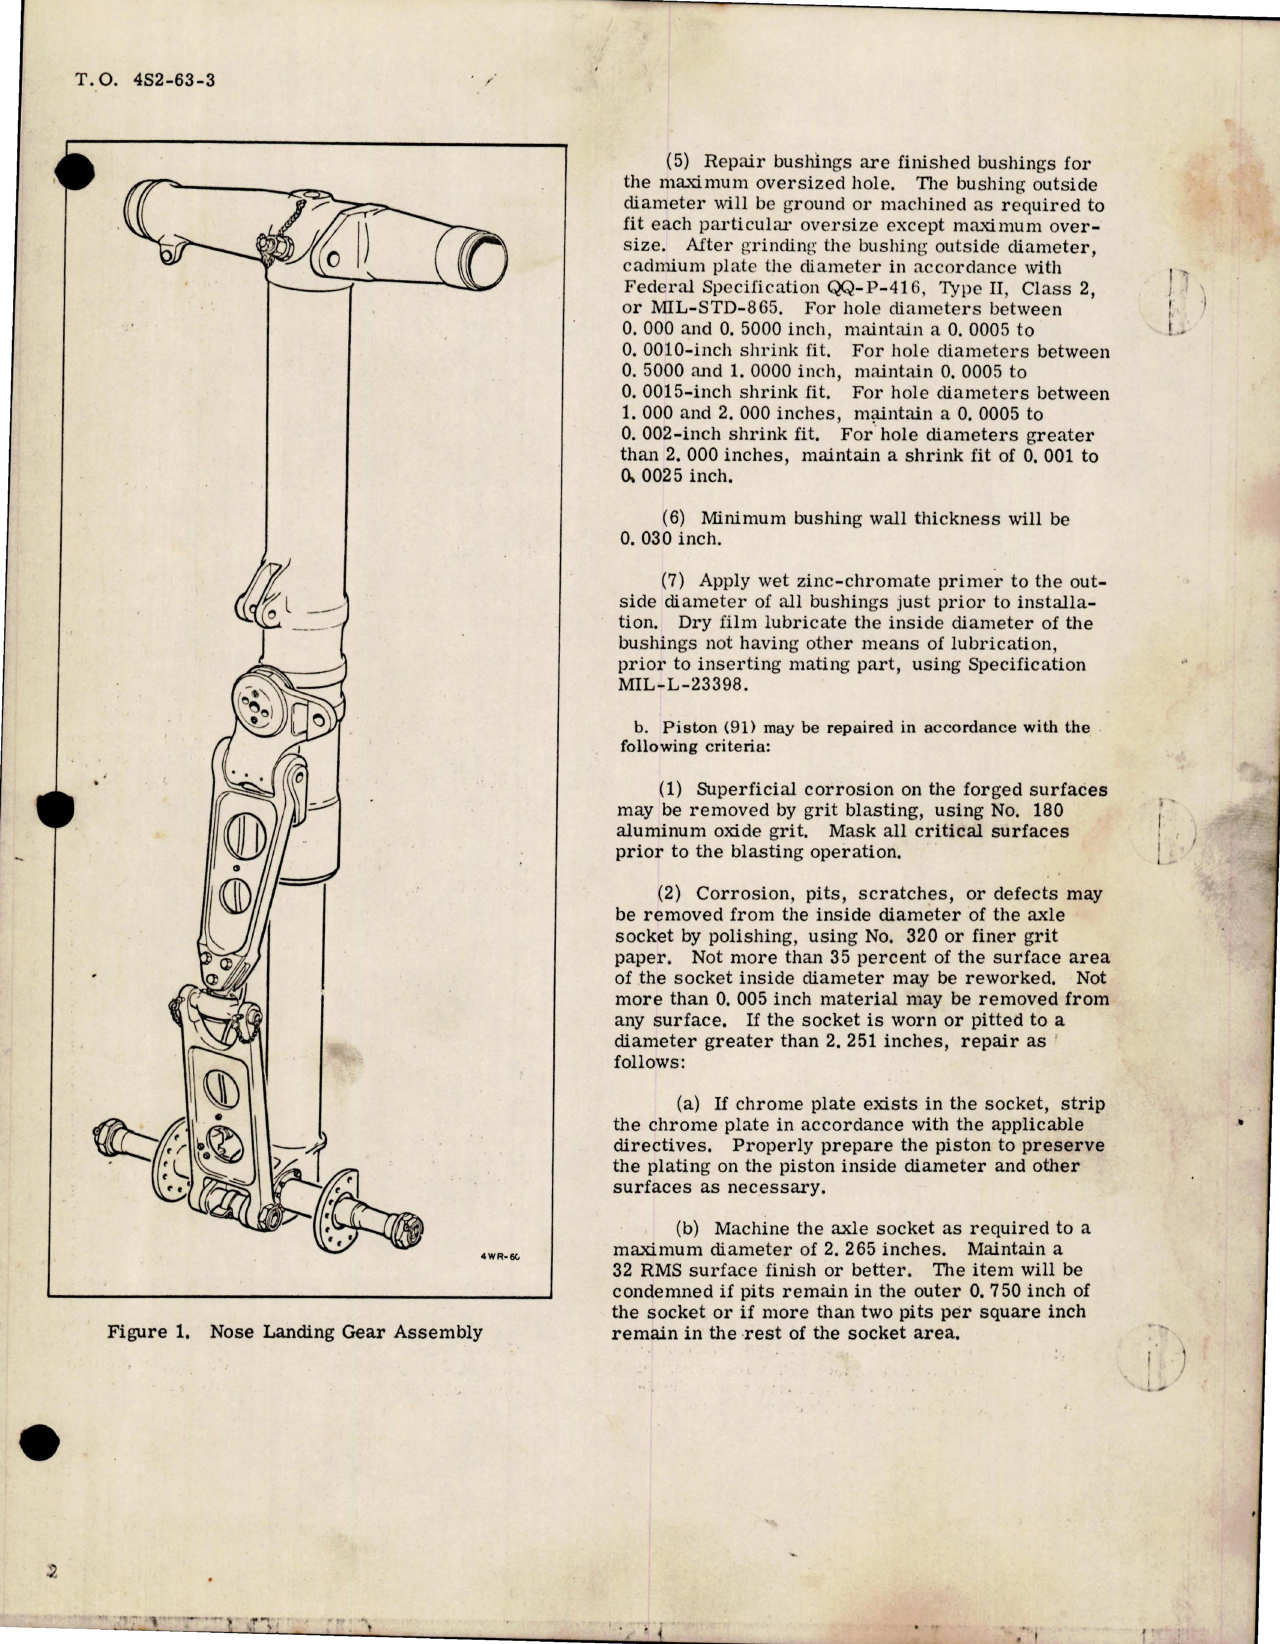 Sample page 5 from AirCorps Library document: Overhaul Instructions with Parts for Nose Landing Gear Assembly - Part 5100 Series 